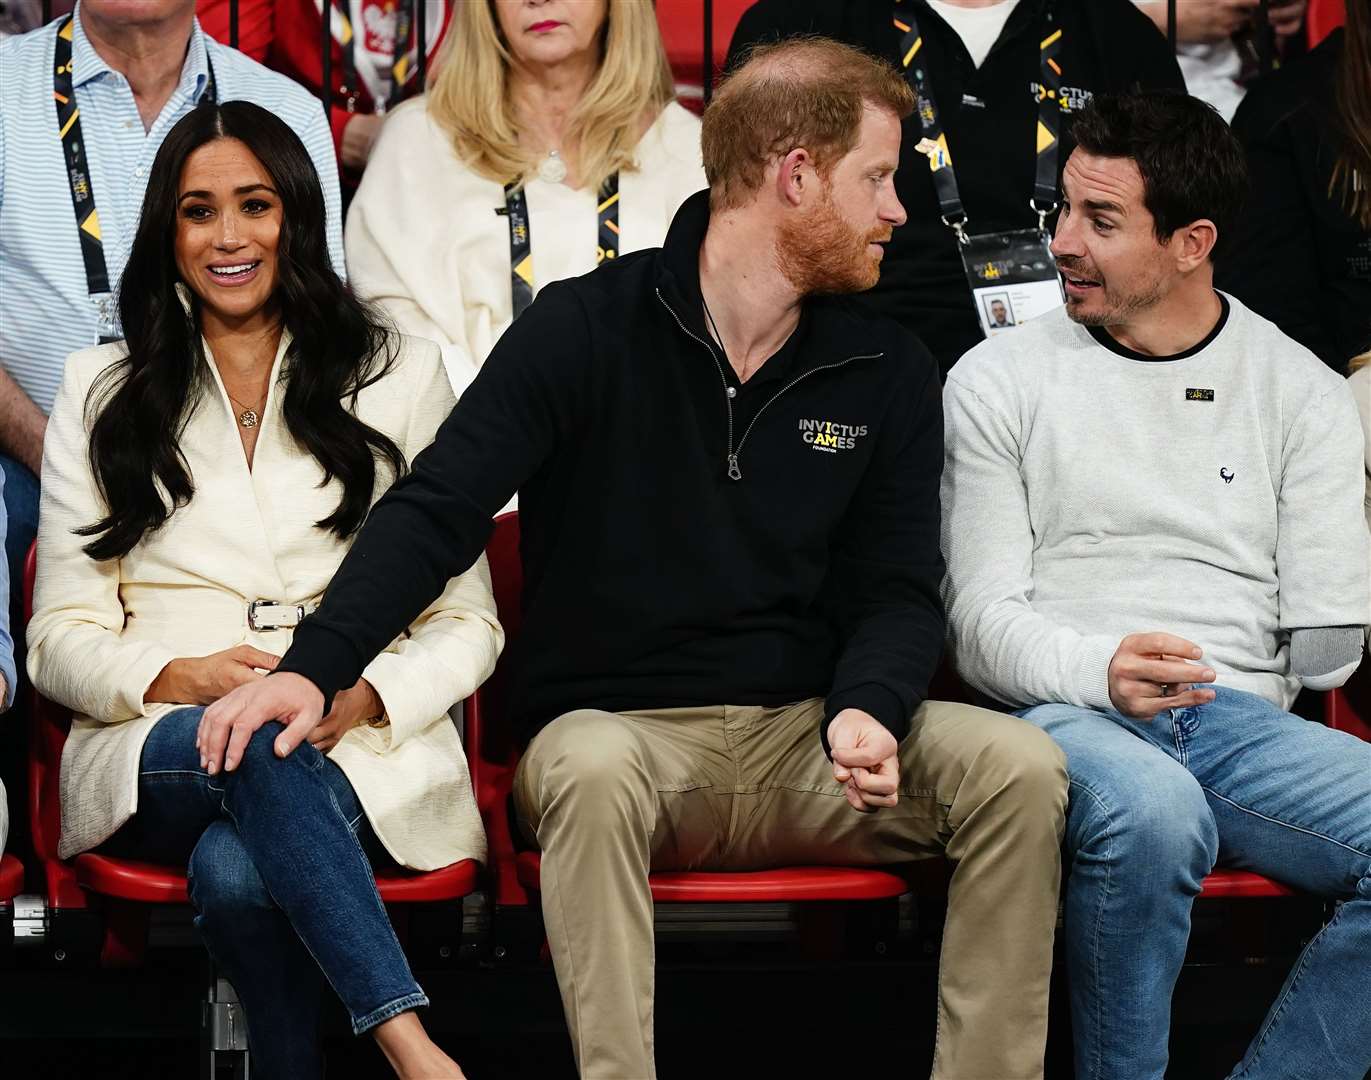 The Duke and Duchess of Sussex attending the Invictus Games in The Hague (PA)